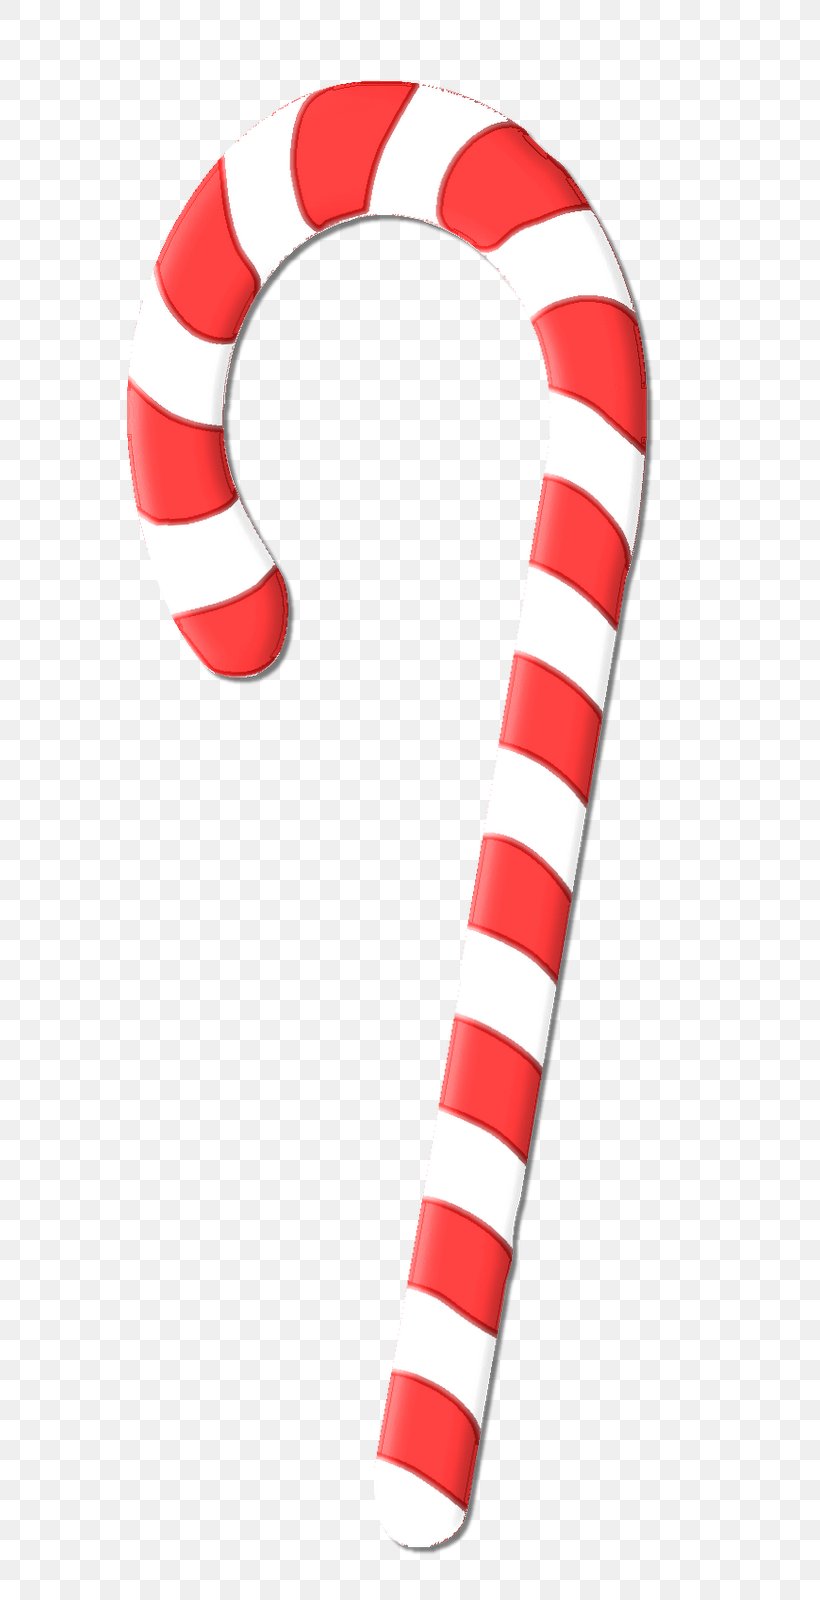 Candy Cane Product Font Line, PNG, 795x1600px, Candy Cane, Christmas, Red Download Free